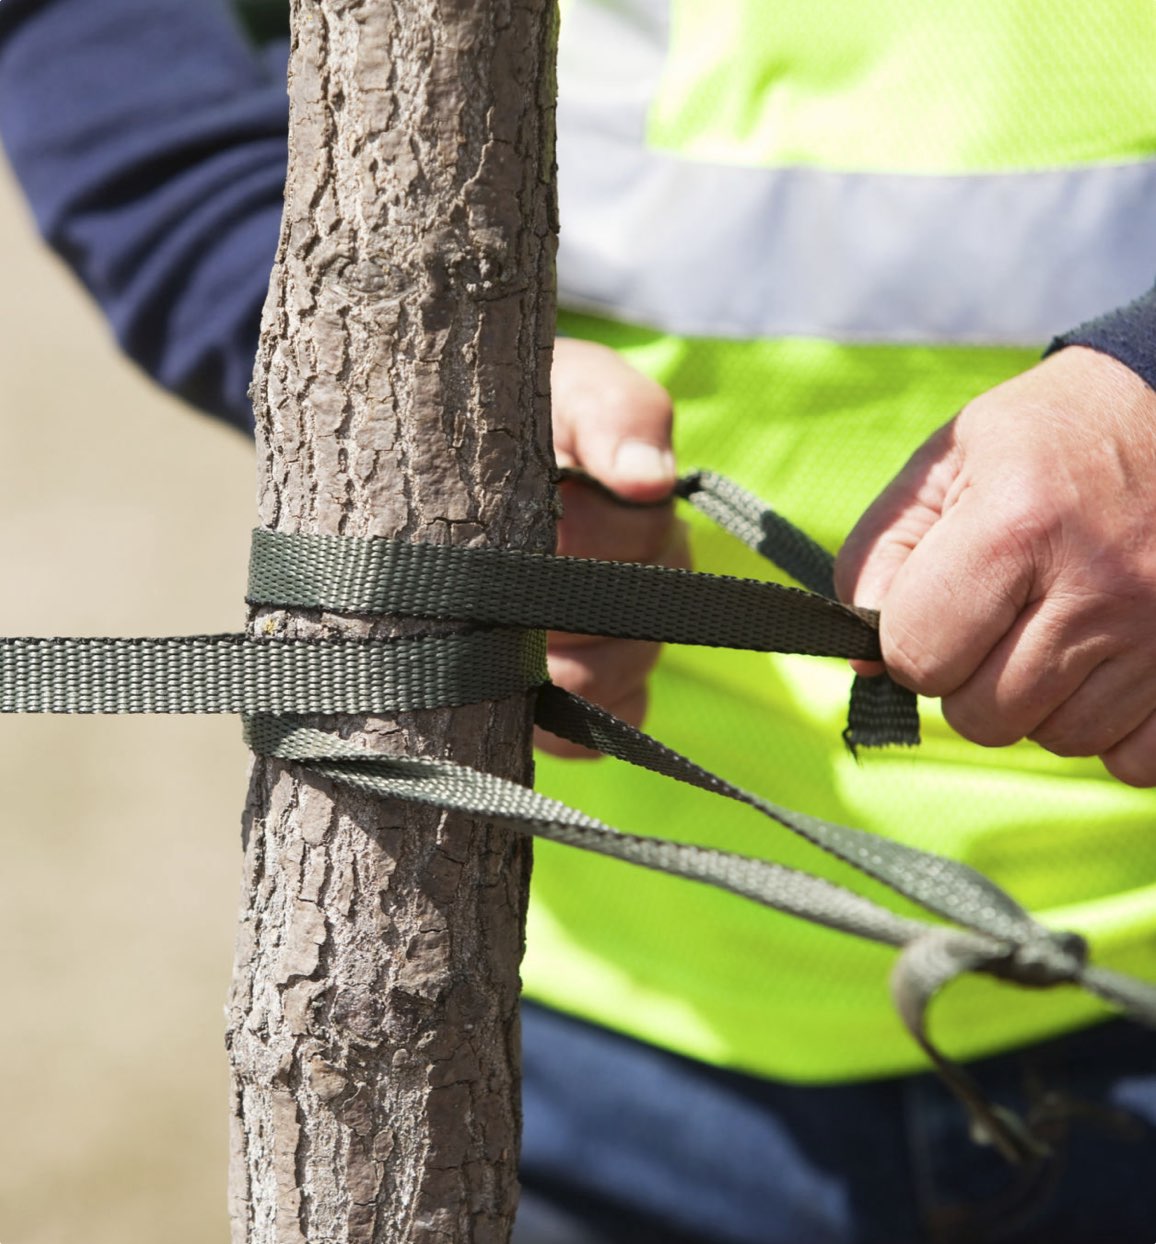 The arborists at Townsend Arborcare can help leaning trees or young trees get the support they need to grow up healthy.